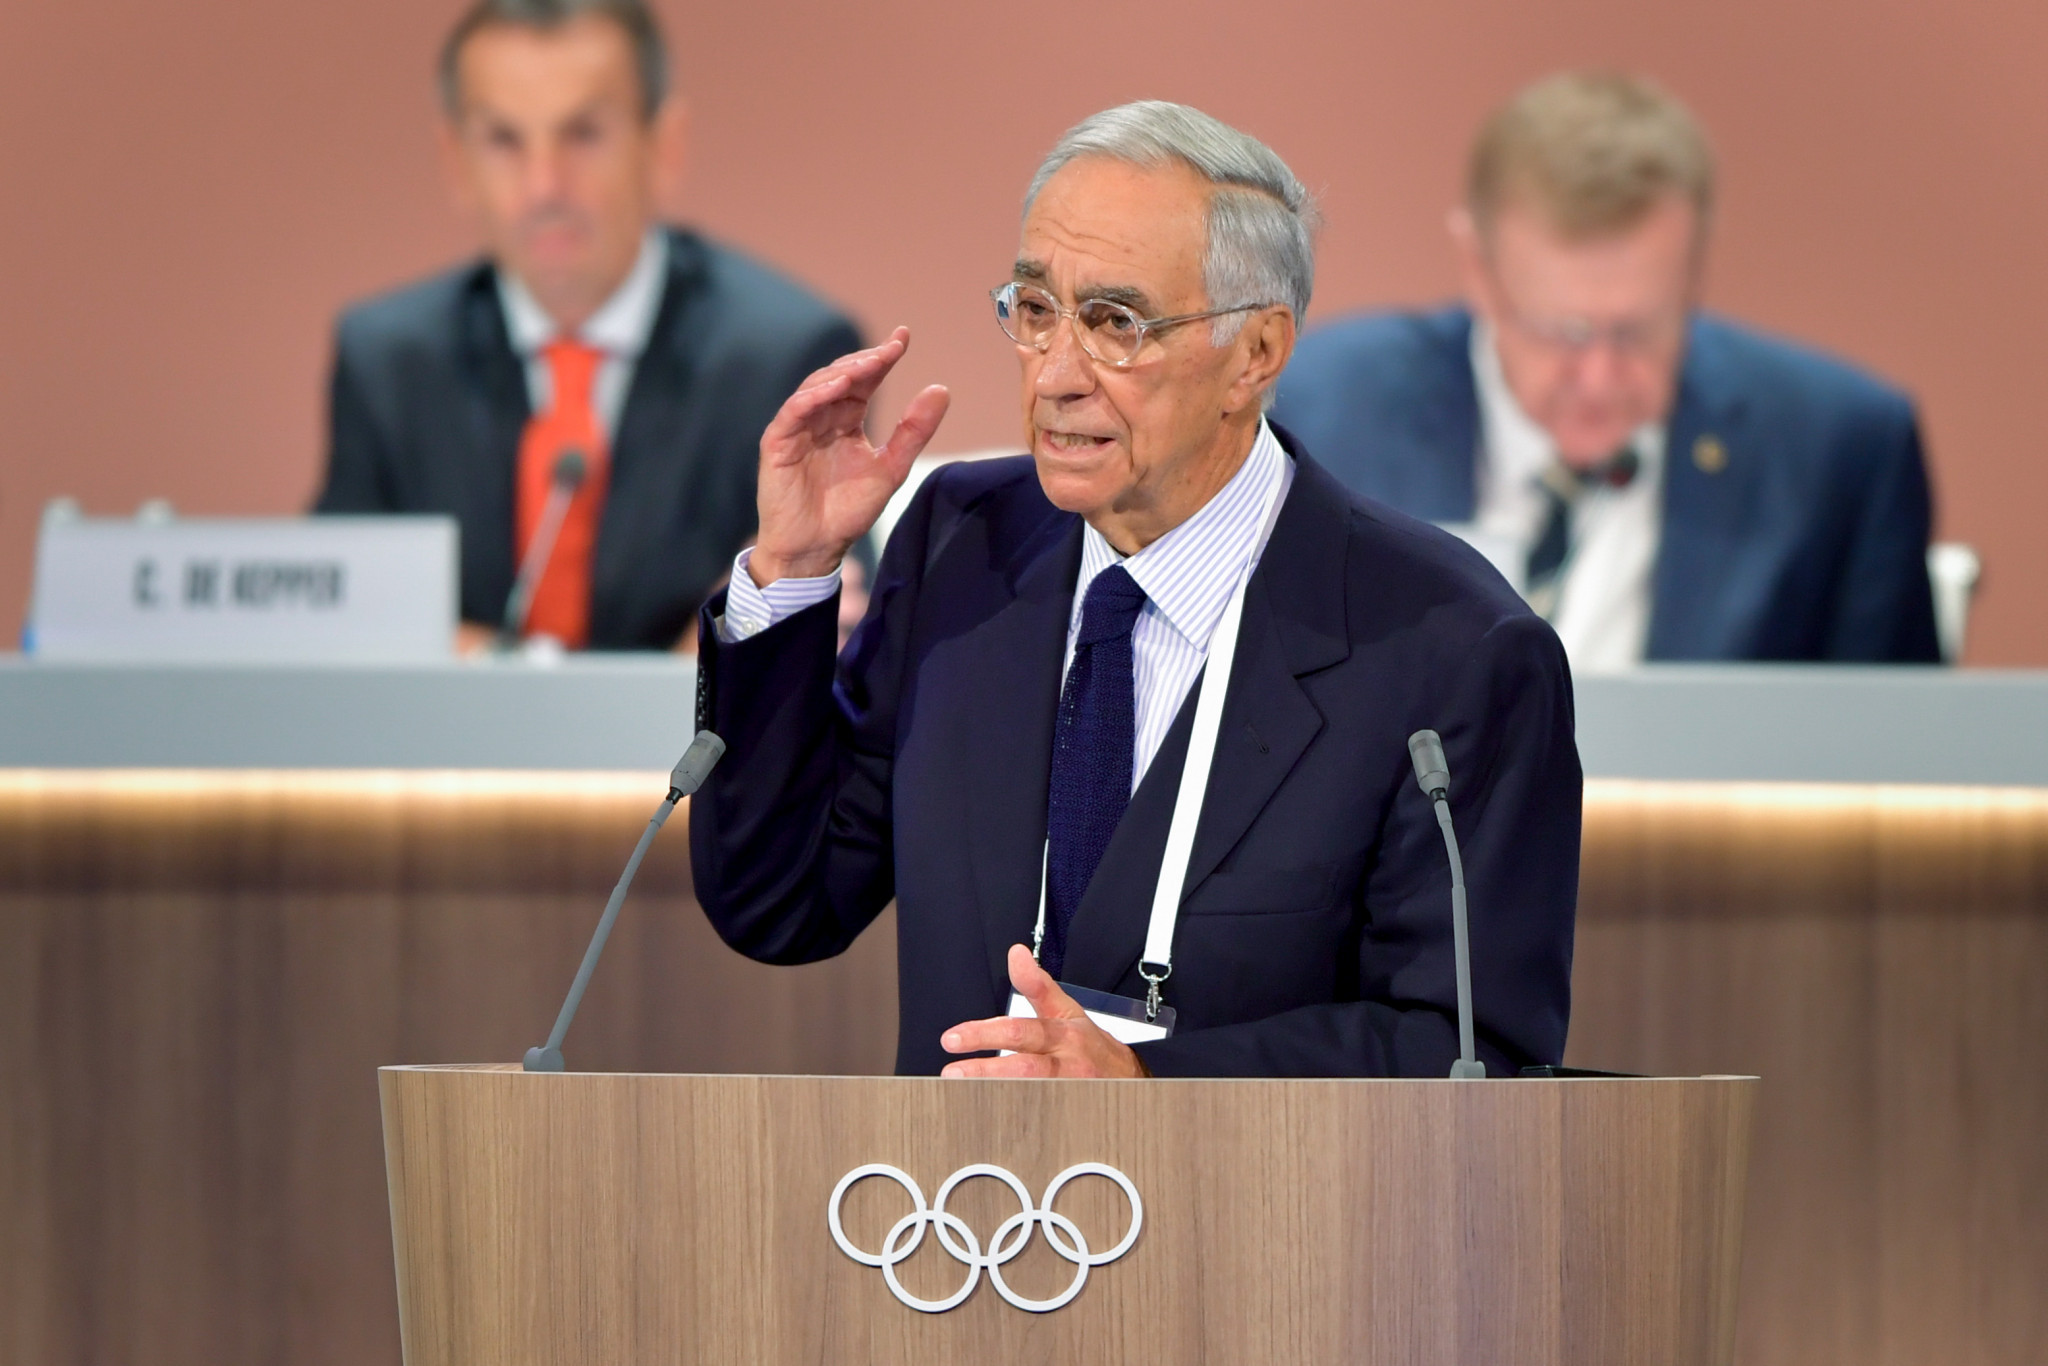 Franco Carraro is among the members to have left the IOC ©Getty Images